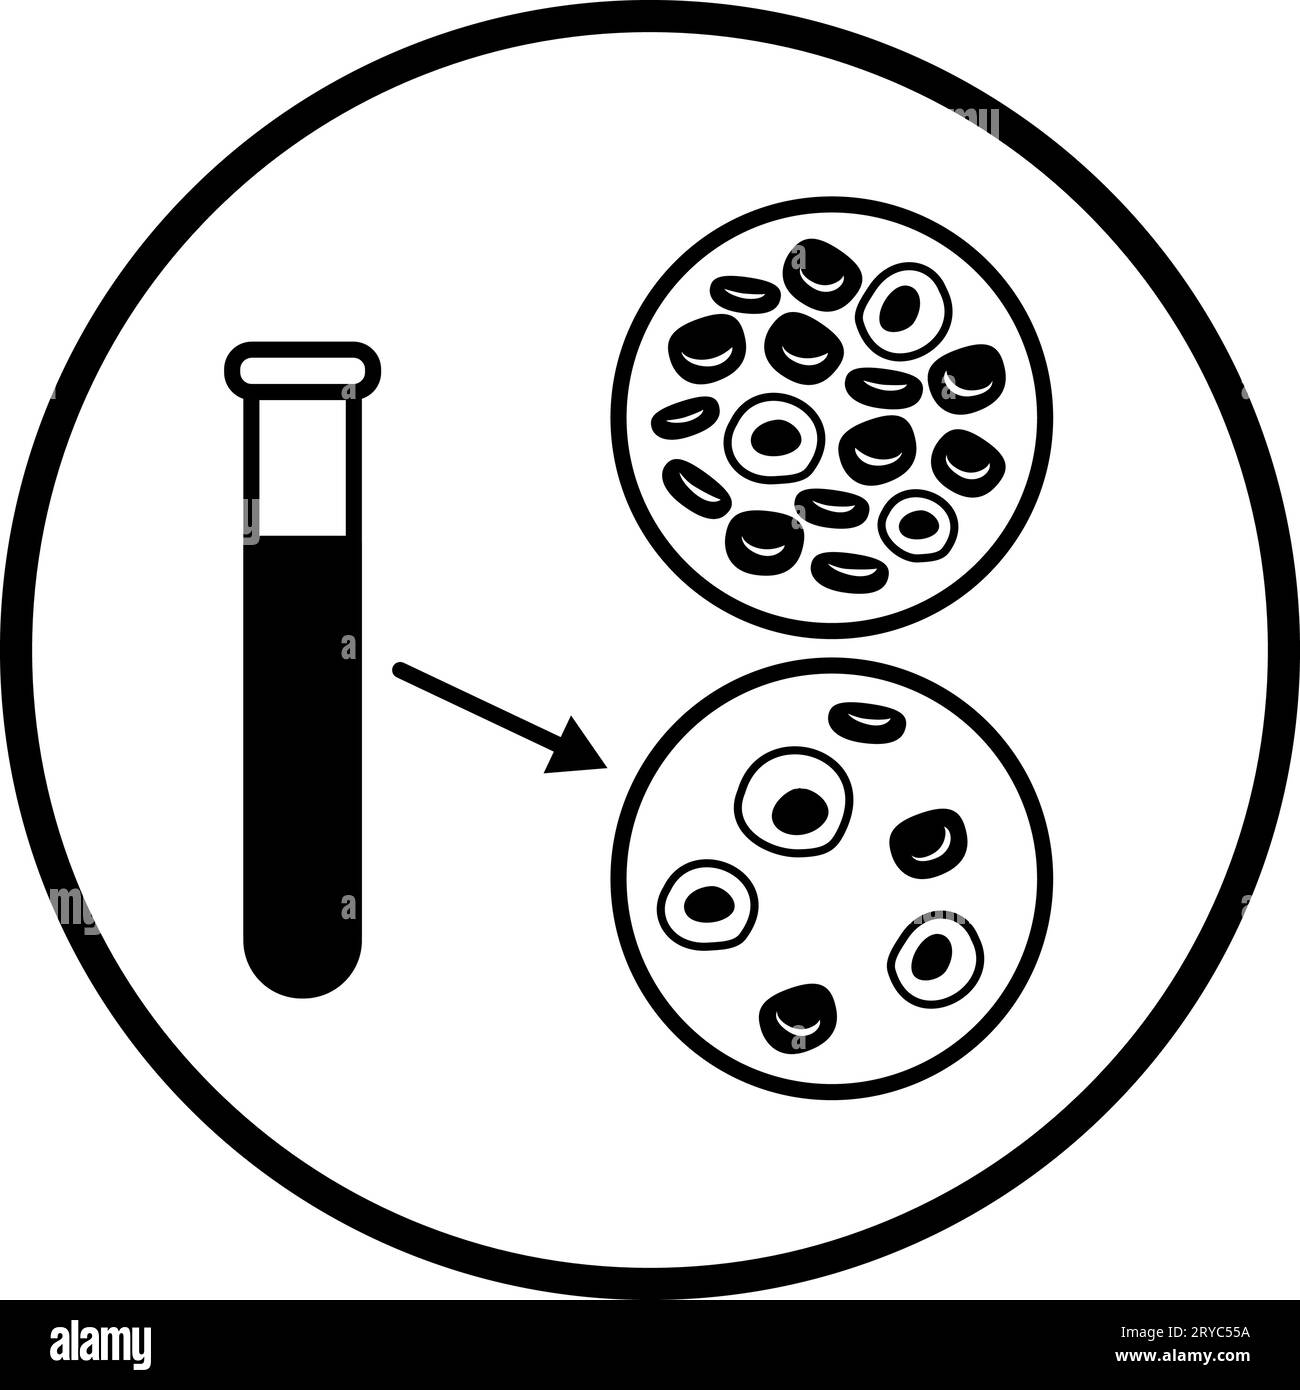 Anemia: blood test comparison between healthy blood and anemic blood, isolated icon Stock Vector